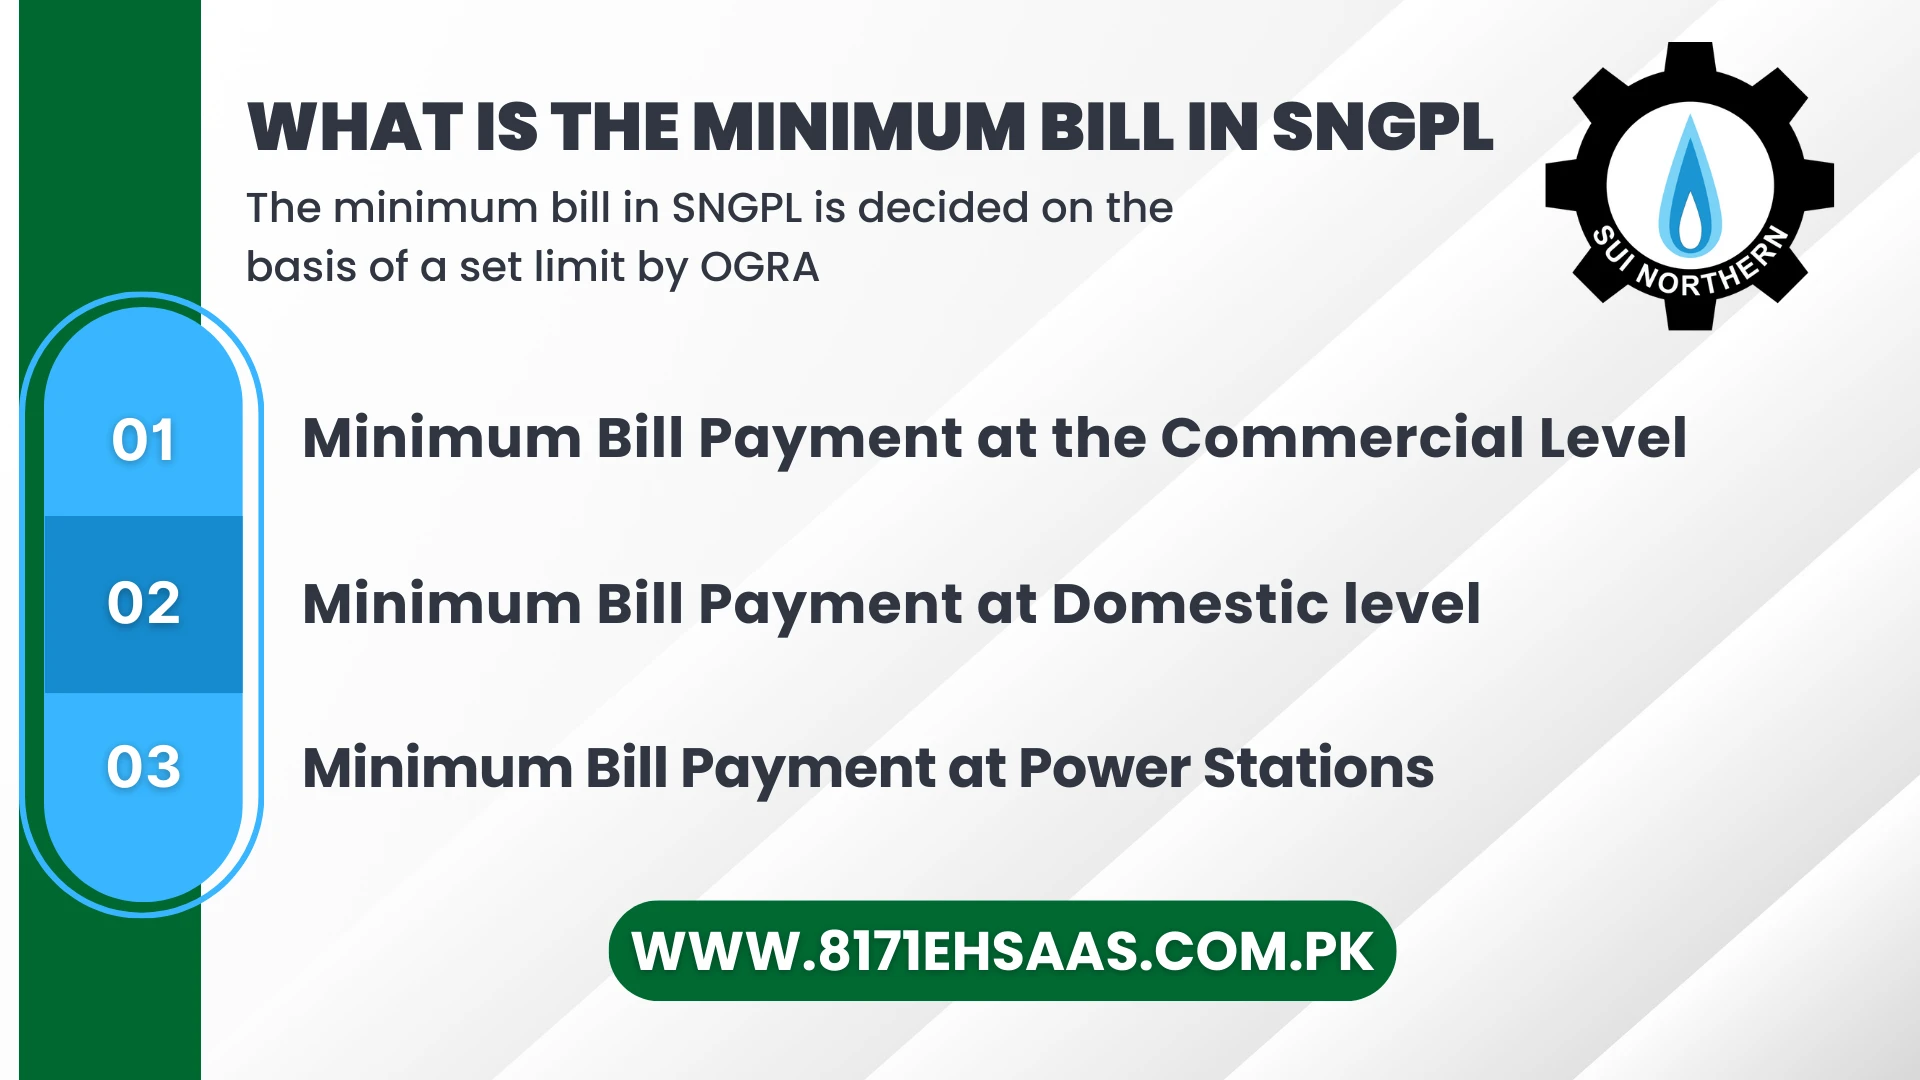 What is the minimum Bill in SNGPL